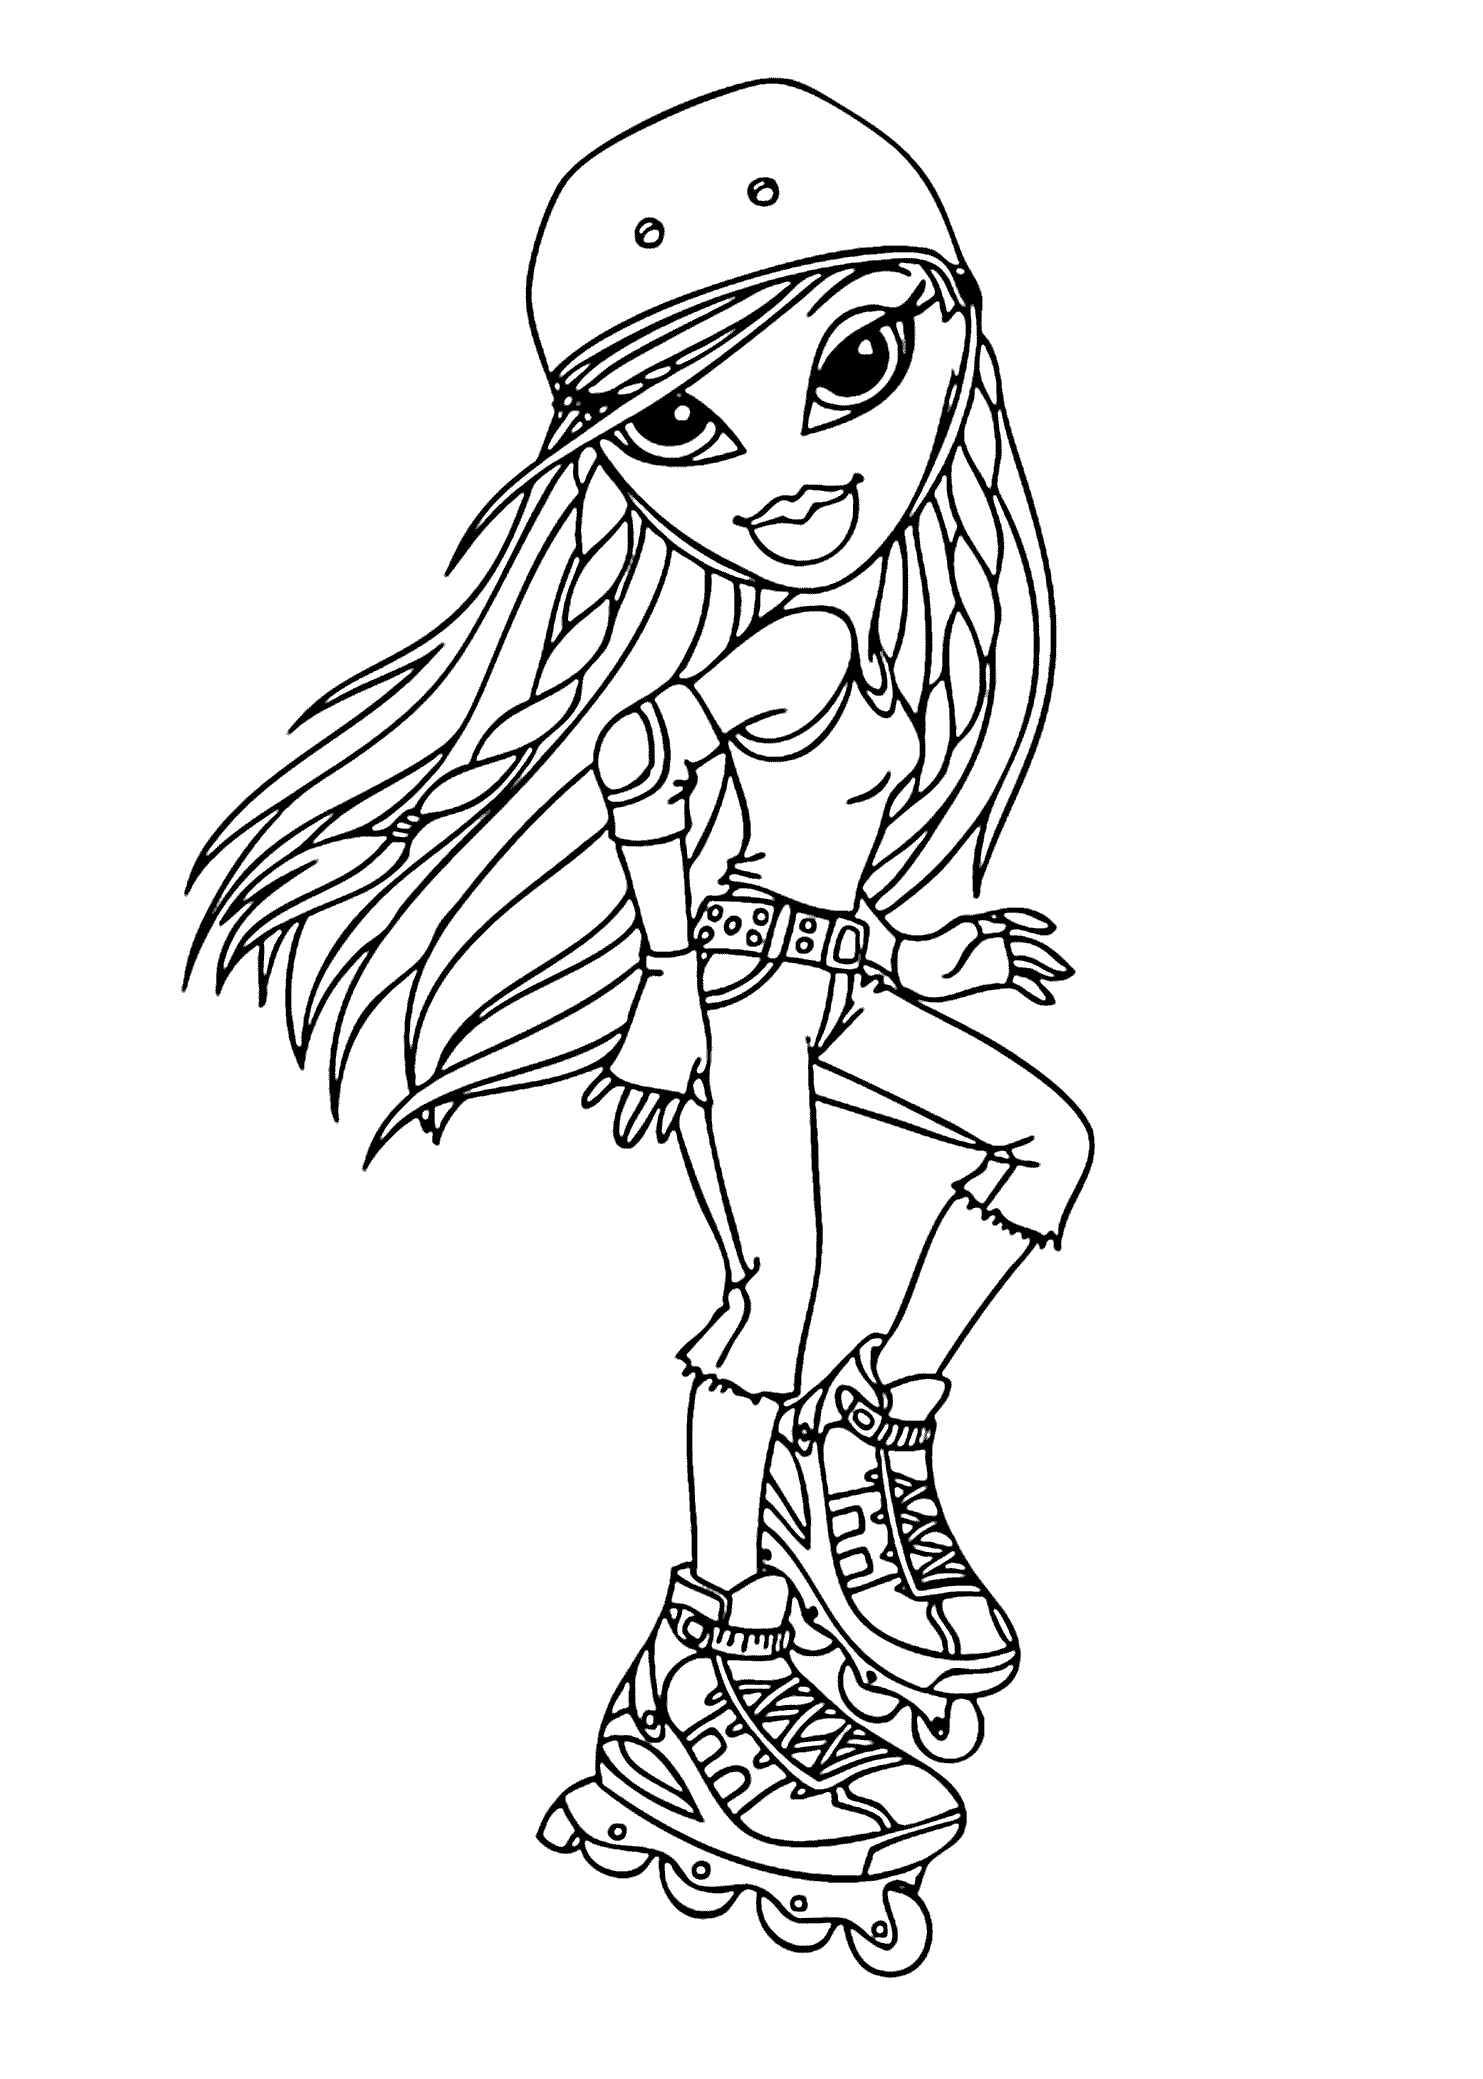 Sasha bratz coloring pages for kids printable free sports coloring pages chibi coloring pages coloring pages for girls